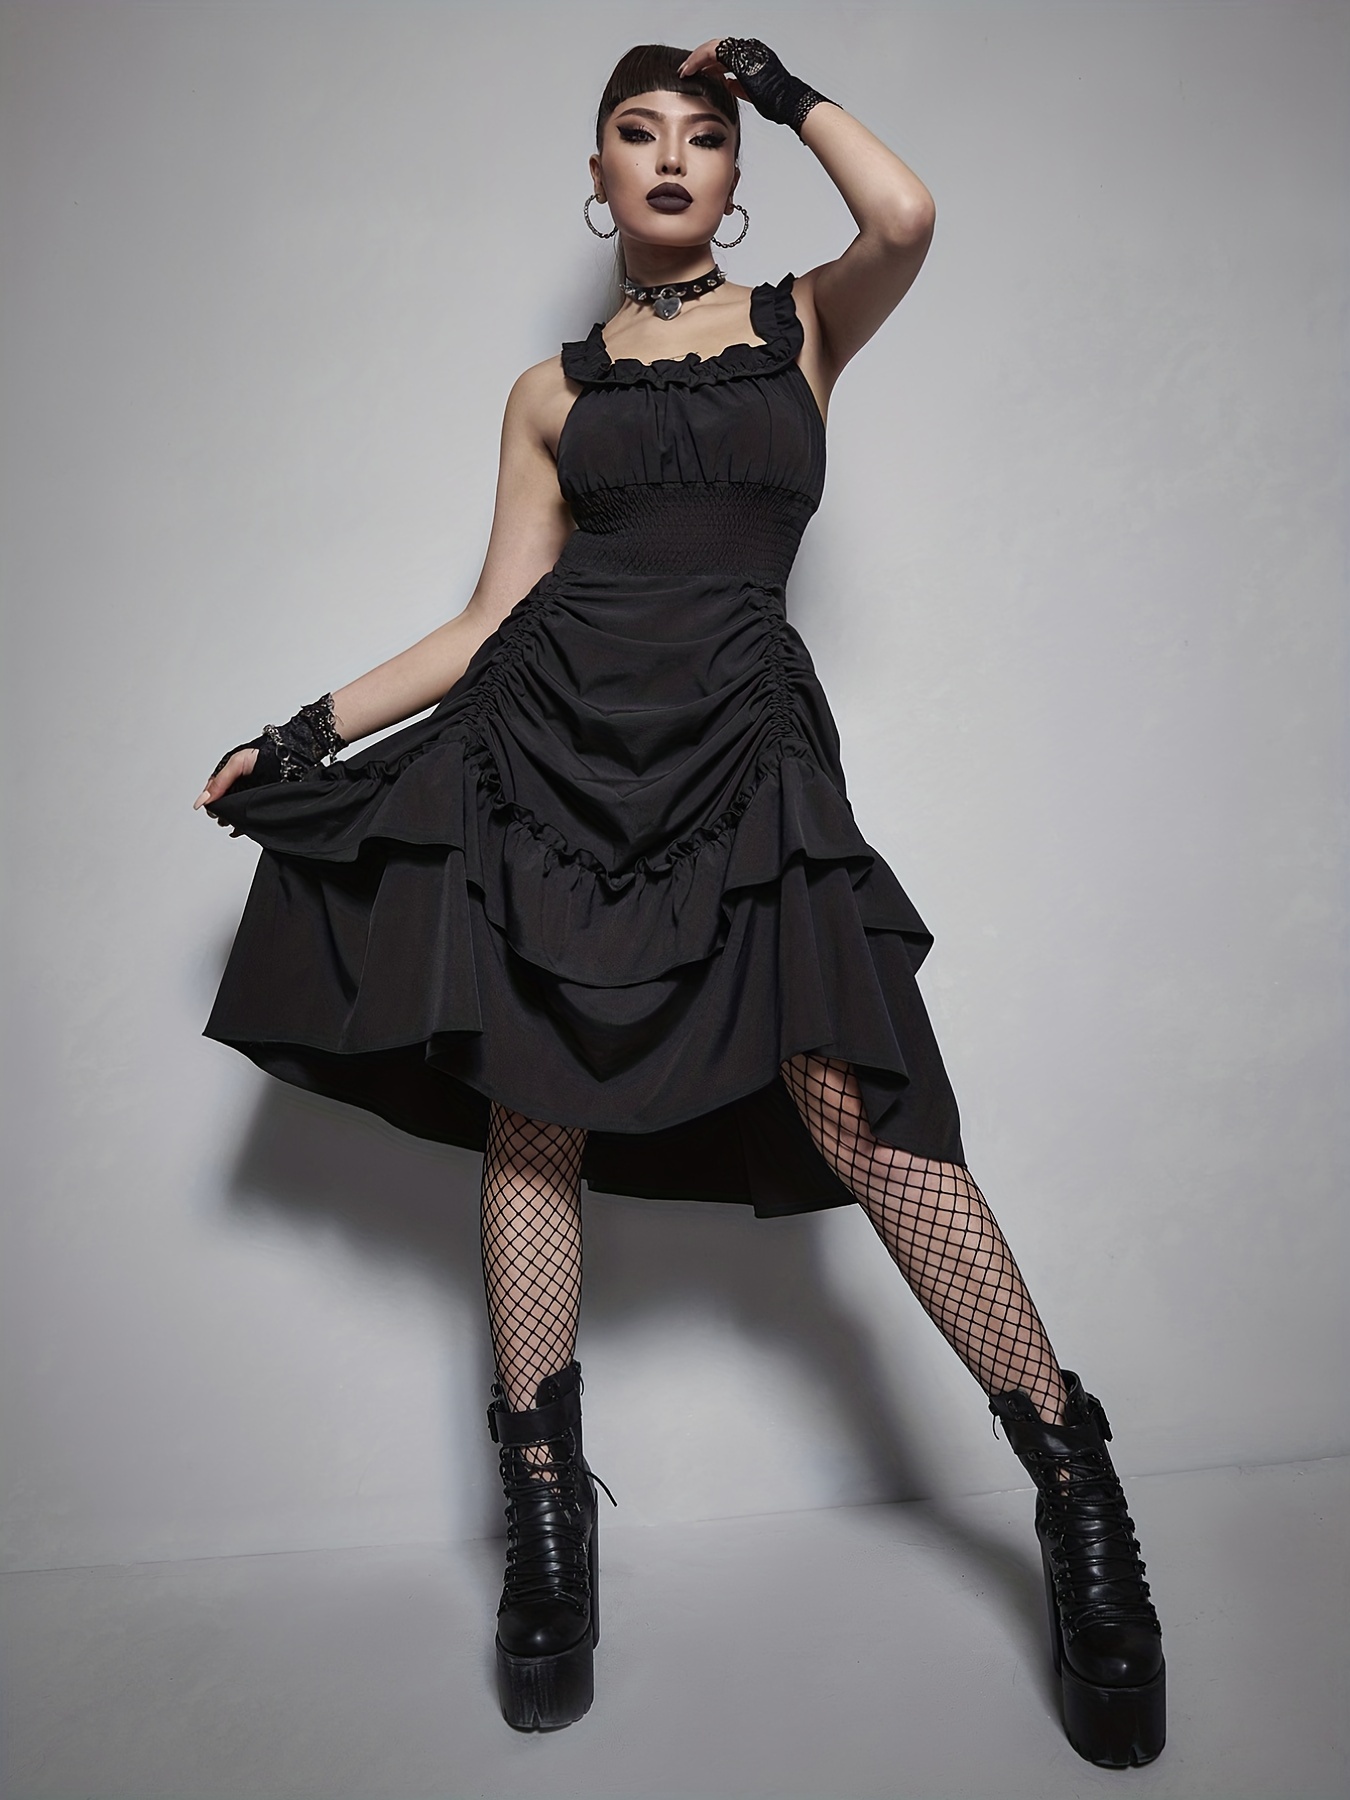 Women's Gothic Black Grungy Shift Dress with Faux Leather Shoulder